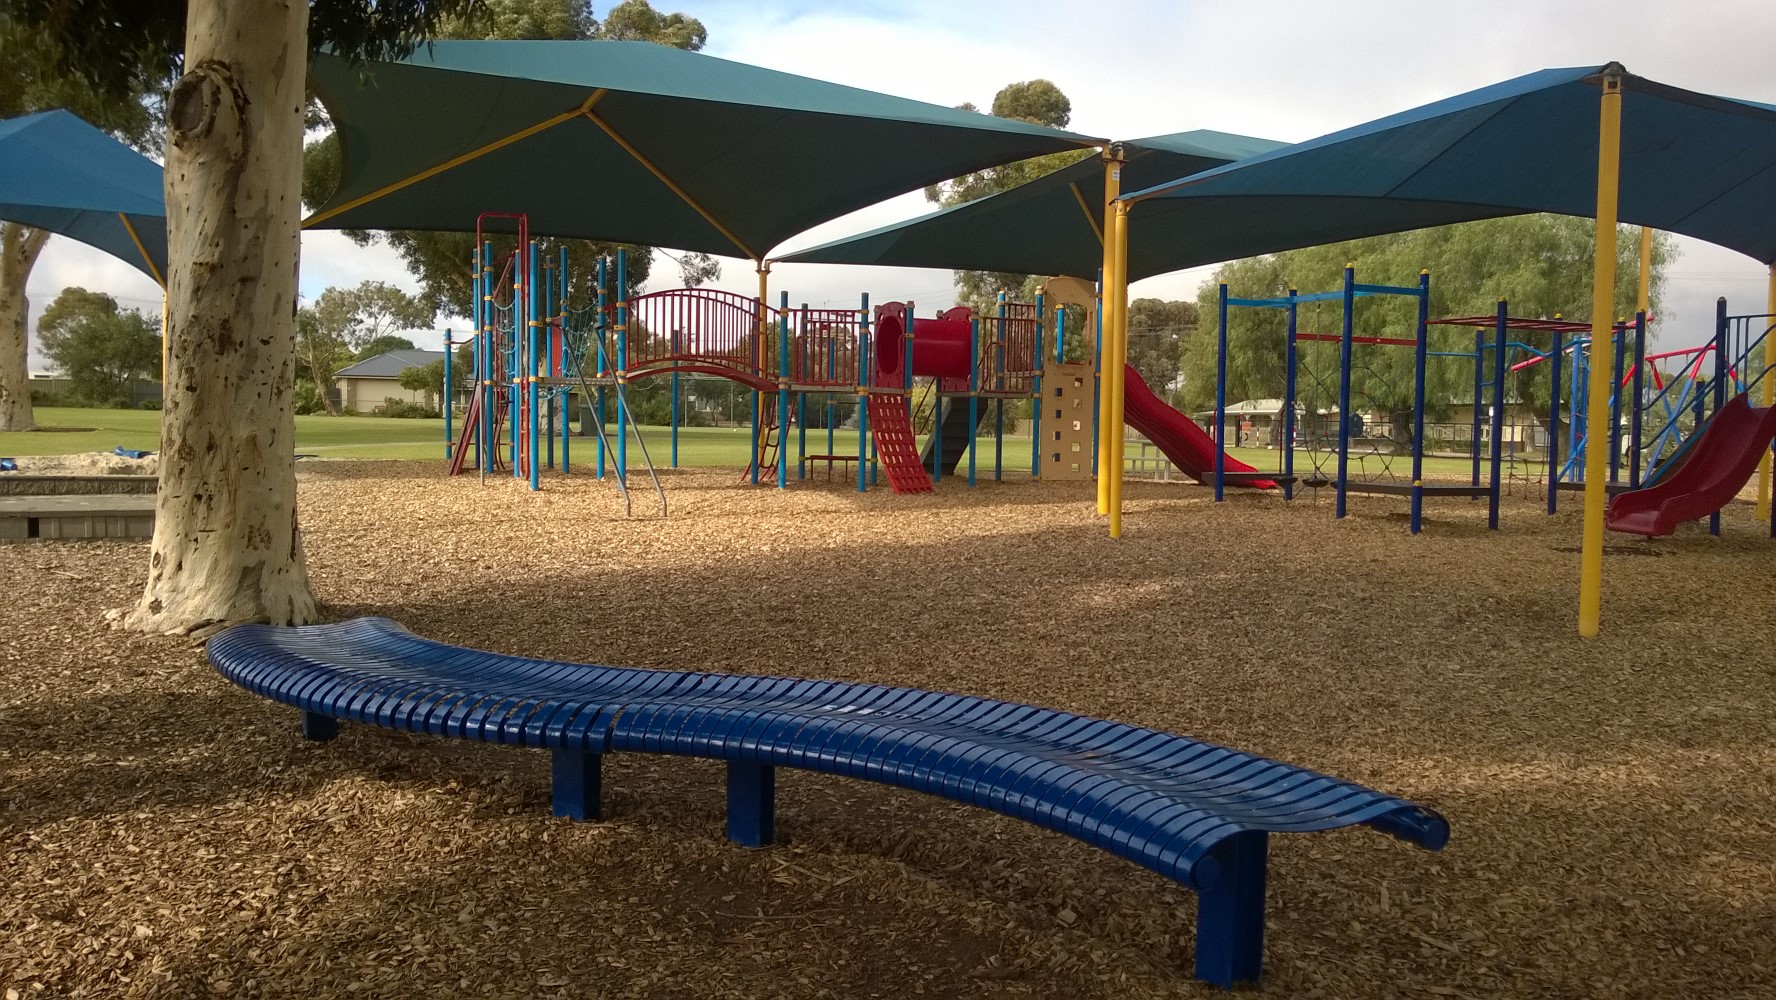 Photograph of playground and friendship bench